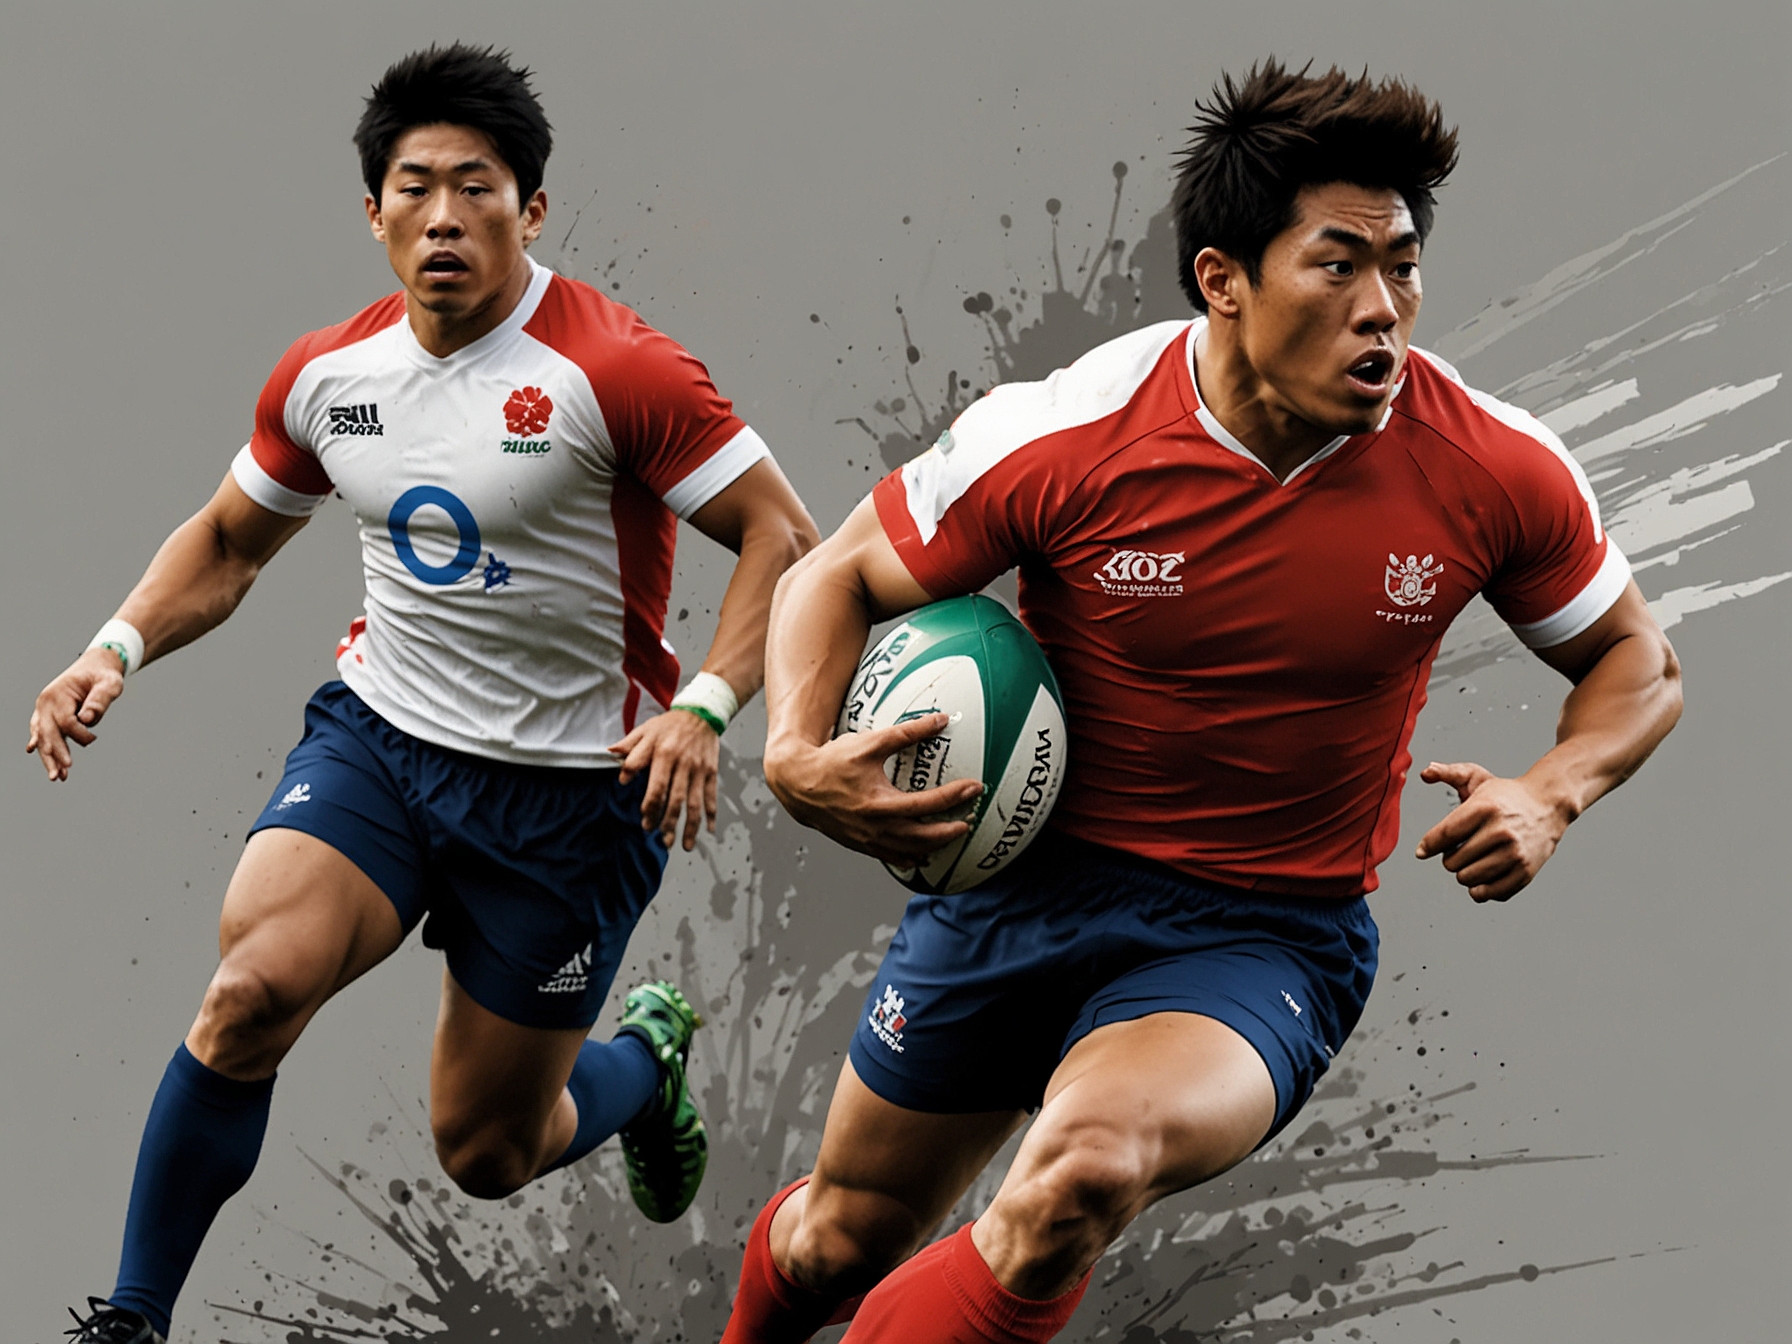 Japan's Kotaro Matsushima sprints towards the try line, showcasing agility and speed, but ultimately unable to overcome England's strong defensive and offensive maneuvers.